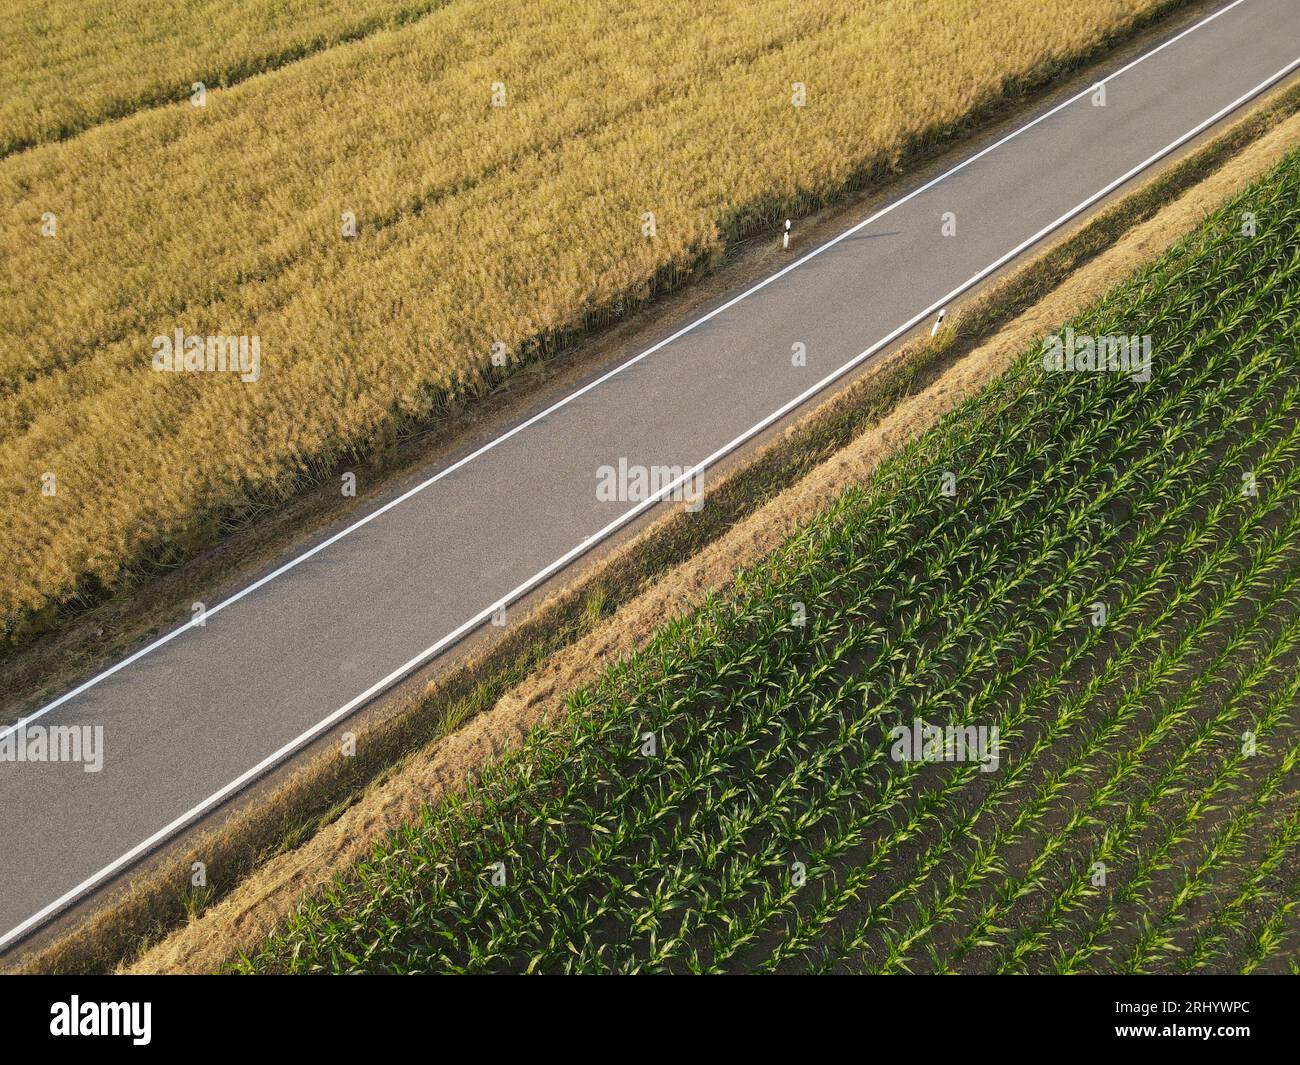 Aerial view of a road between crop and corn fields in the countryside Stock Photo